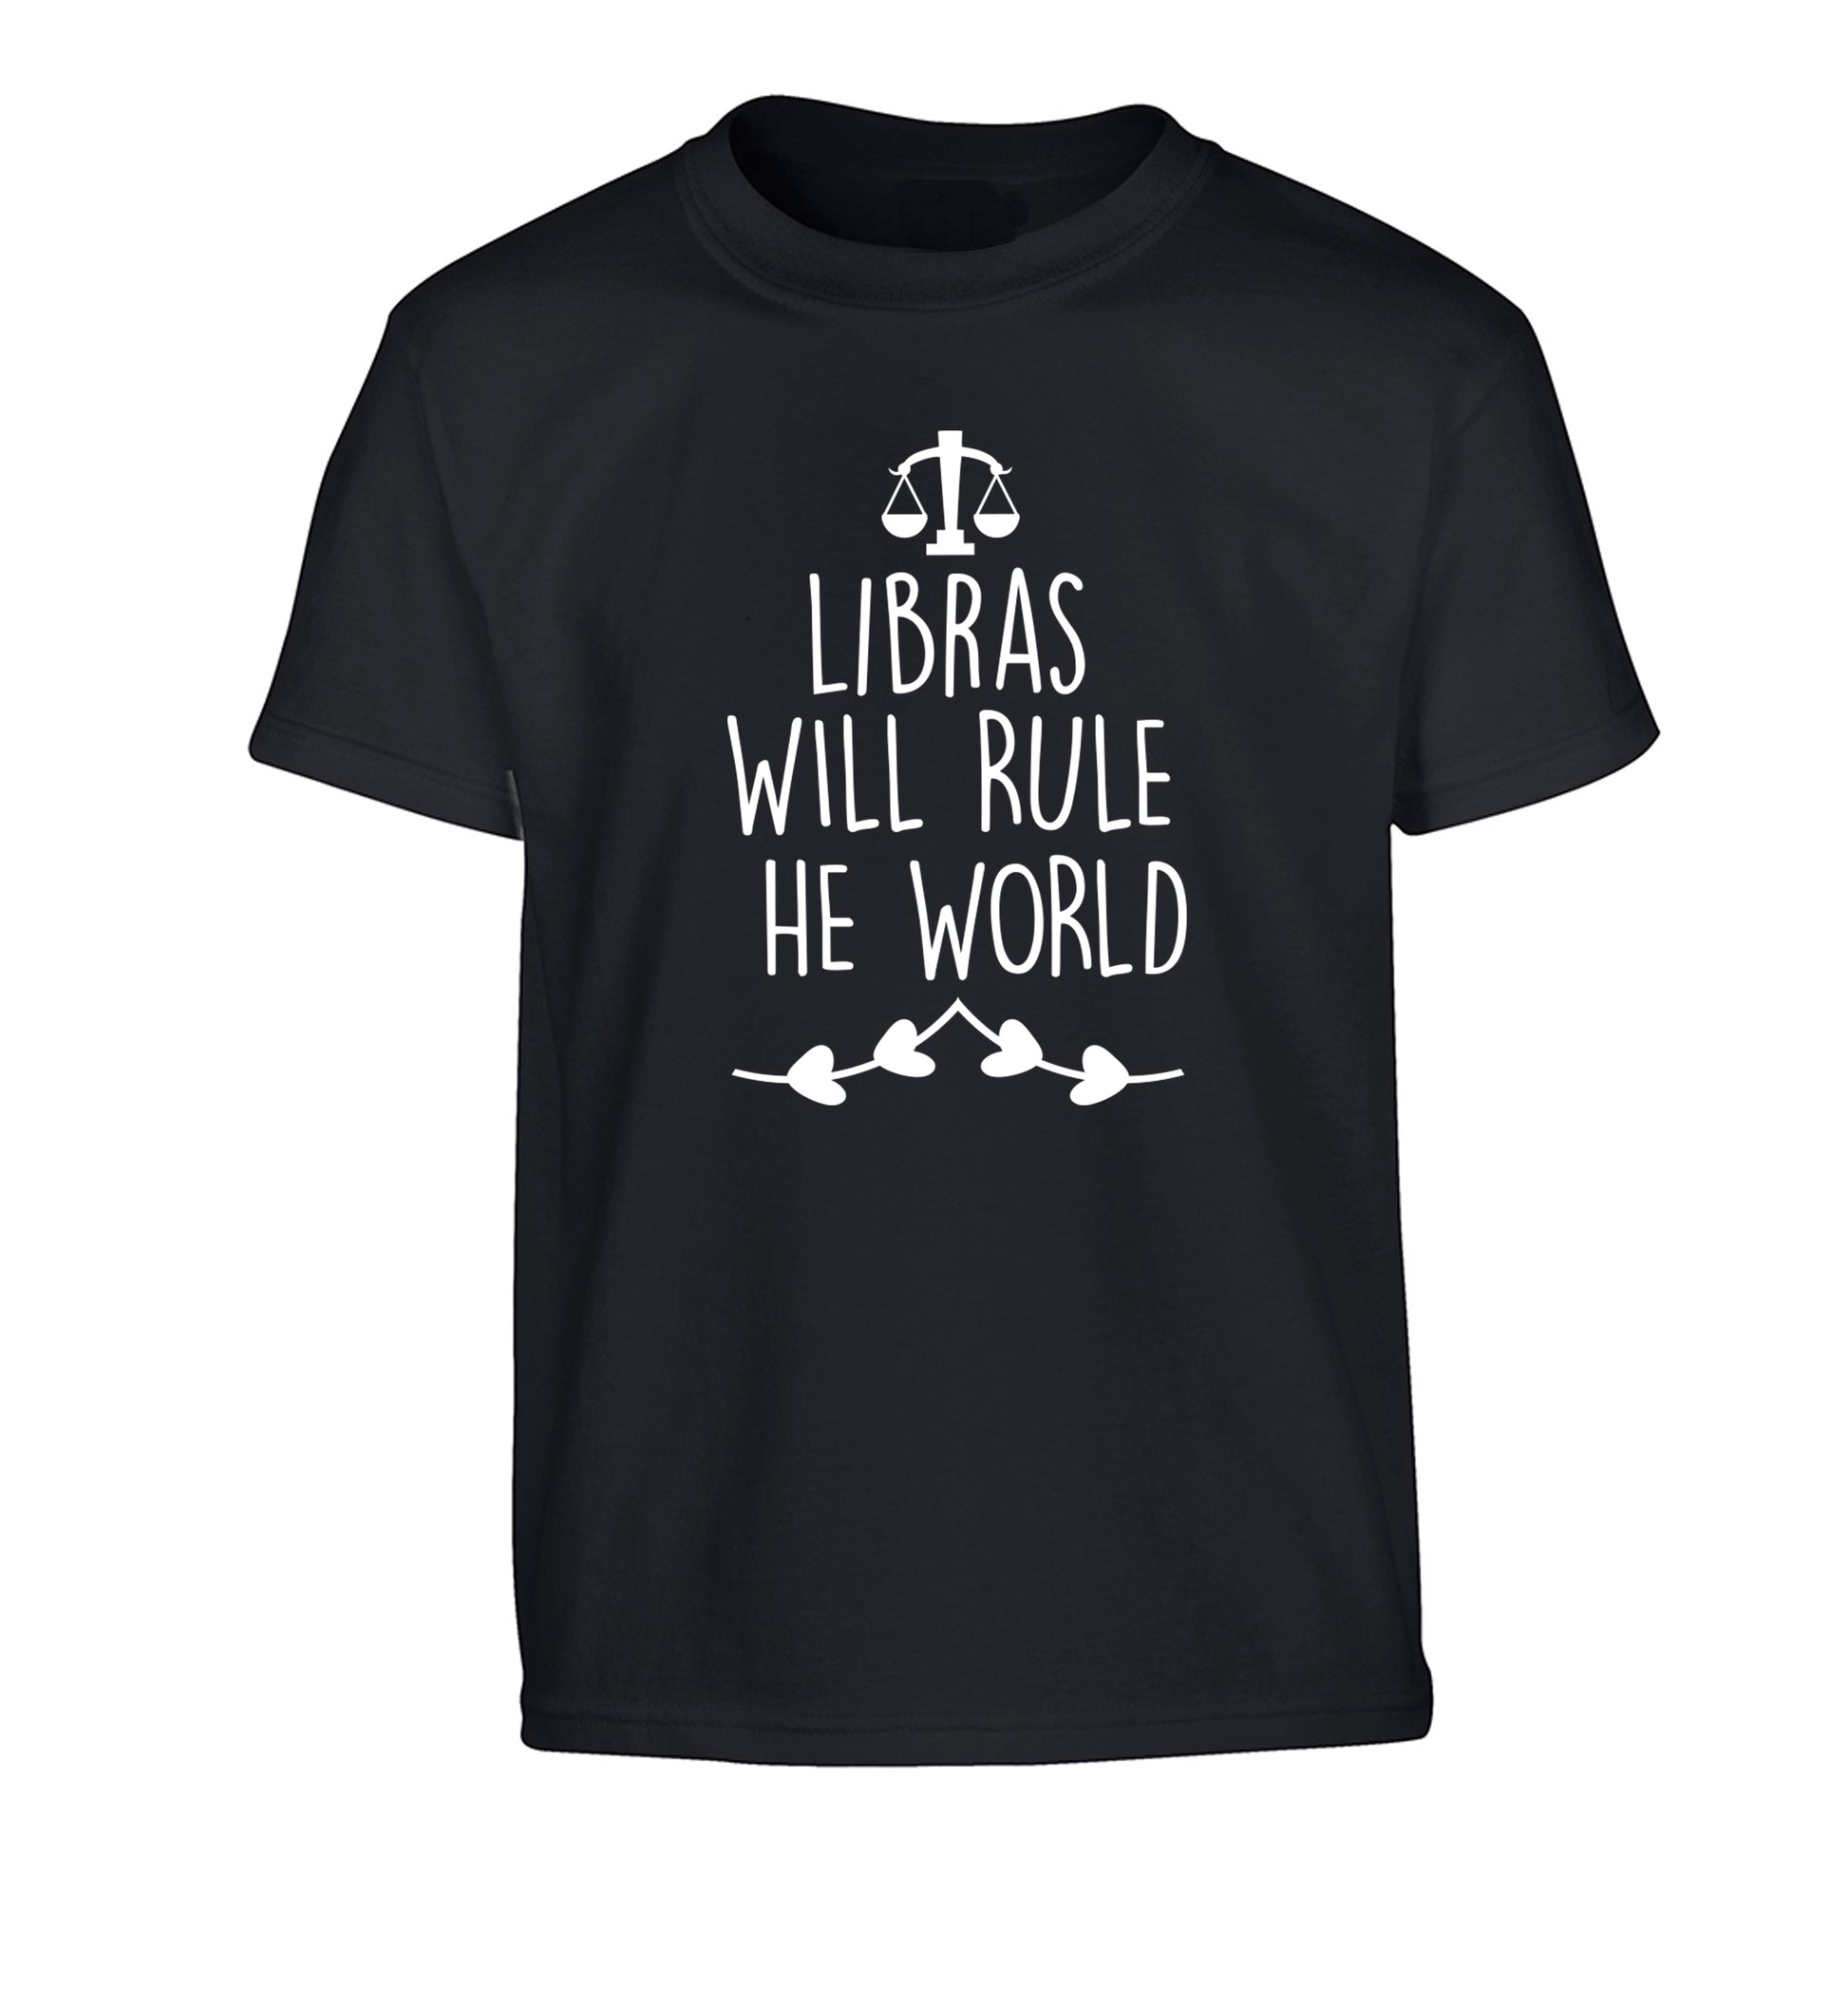 Libras will rule the world Children's black Tshirt 12-13 Years